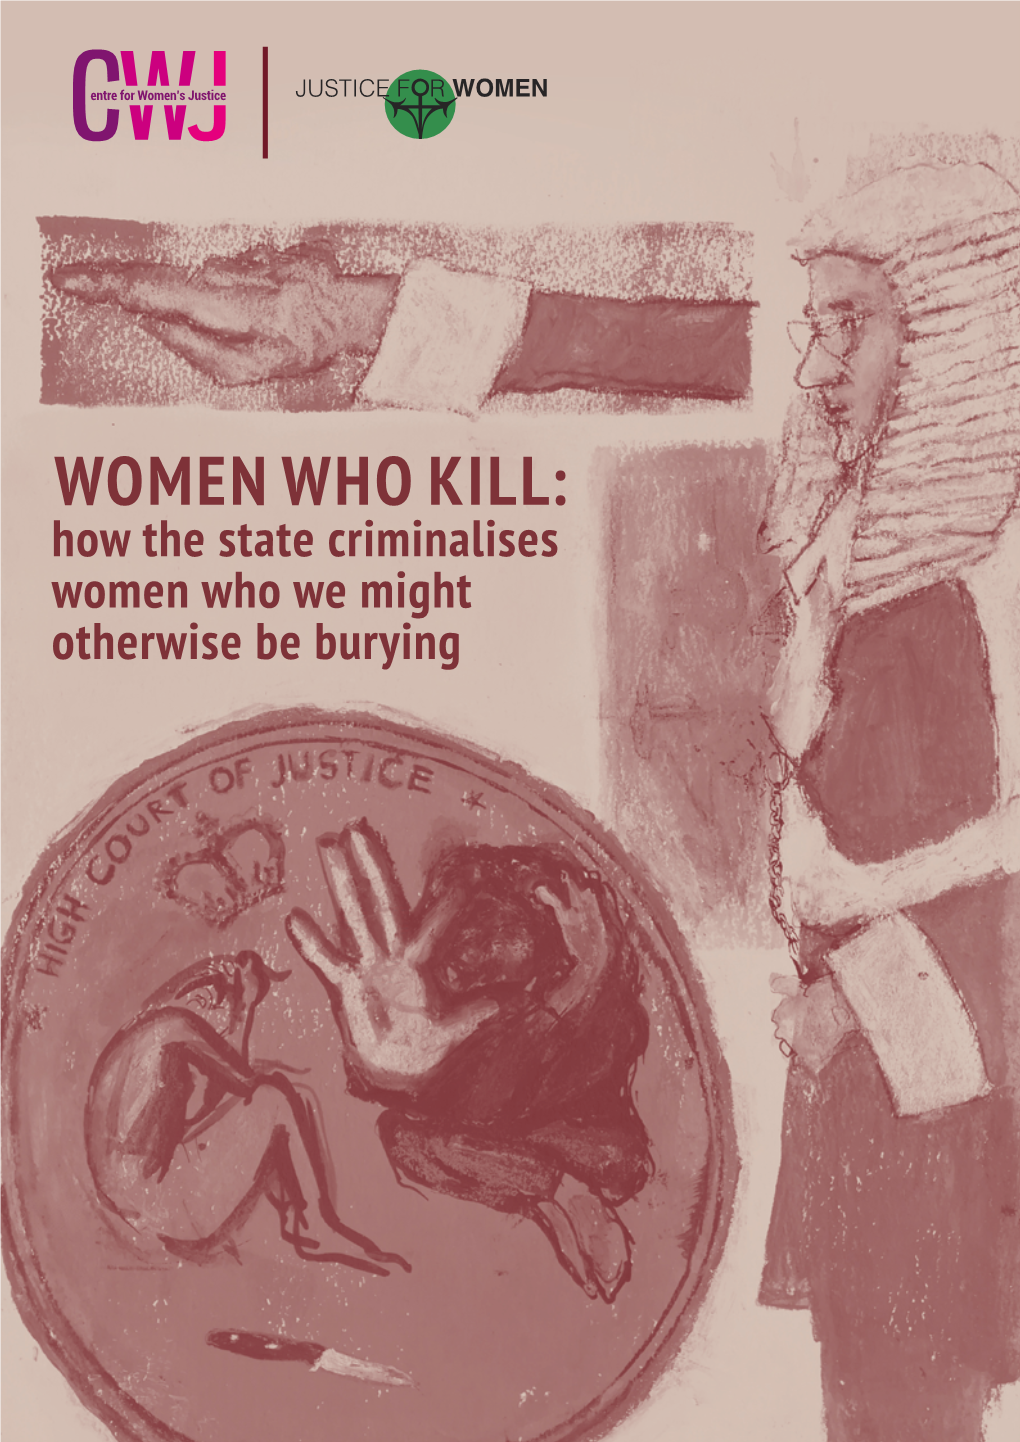 WOMEN WHO KILL: How the State Criminalises Women Who We Might Otherwise Be Burying TABLE of CONTENTS